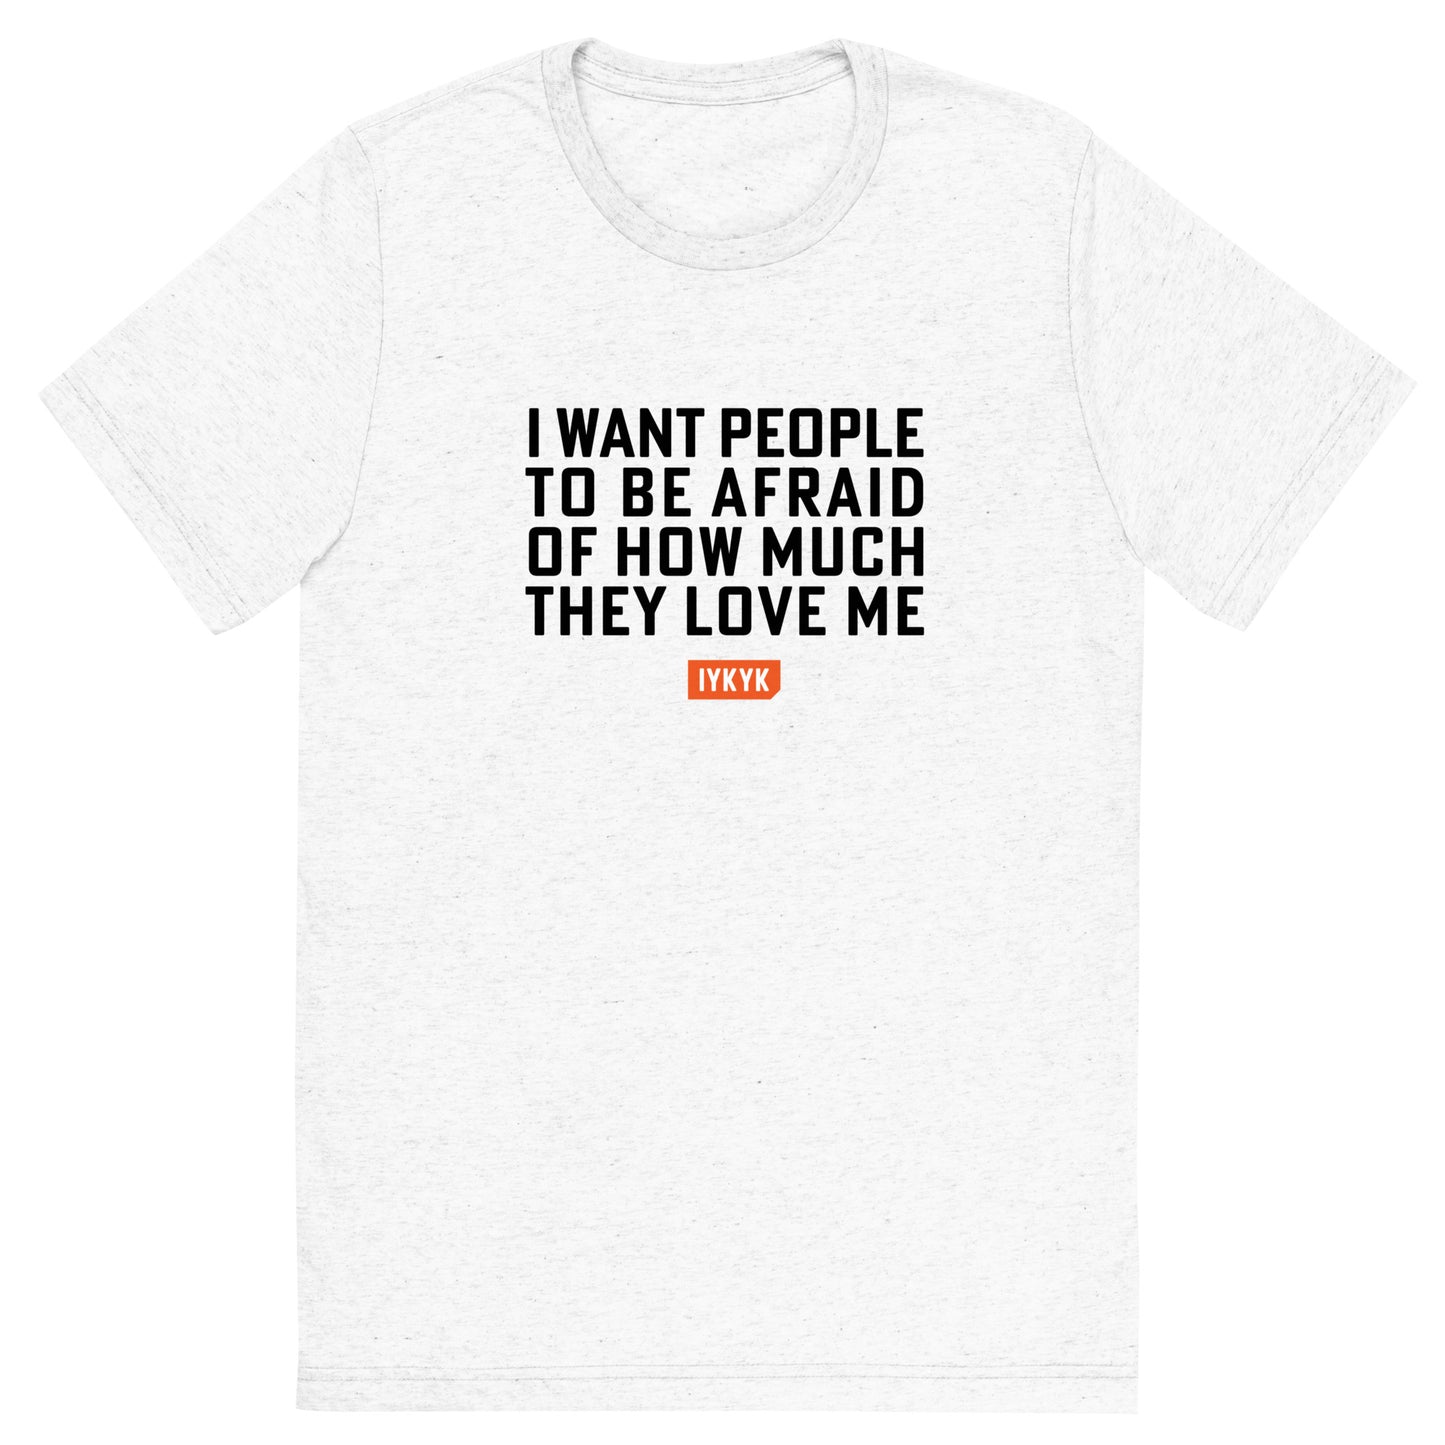 Premium Everyday Afraid and Love The Office Tee